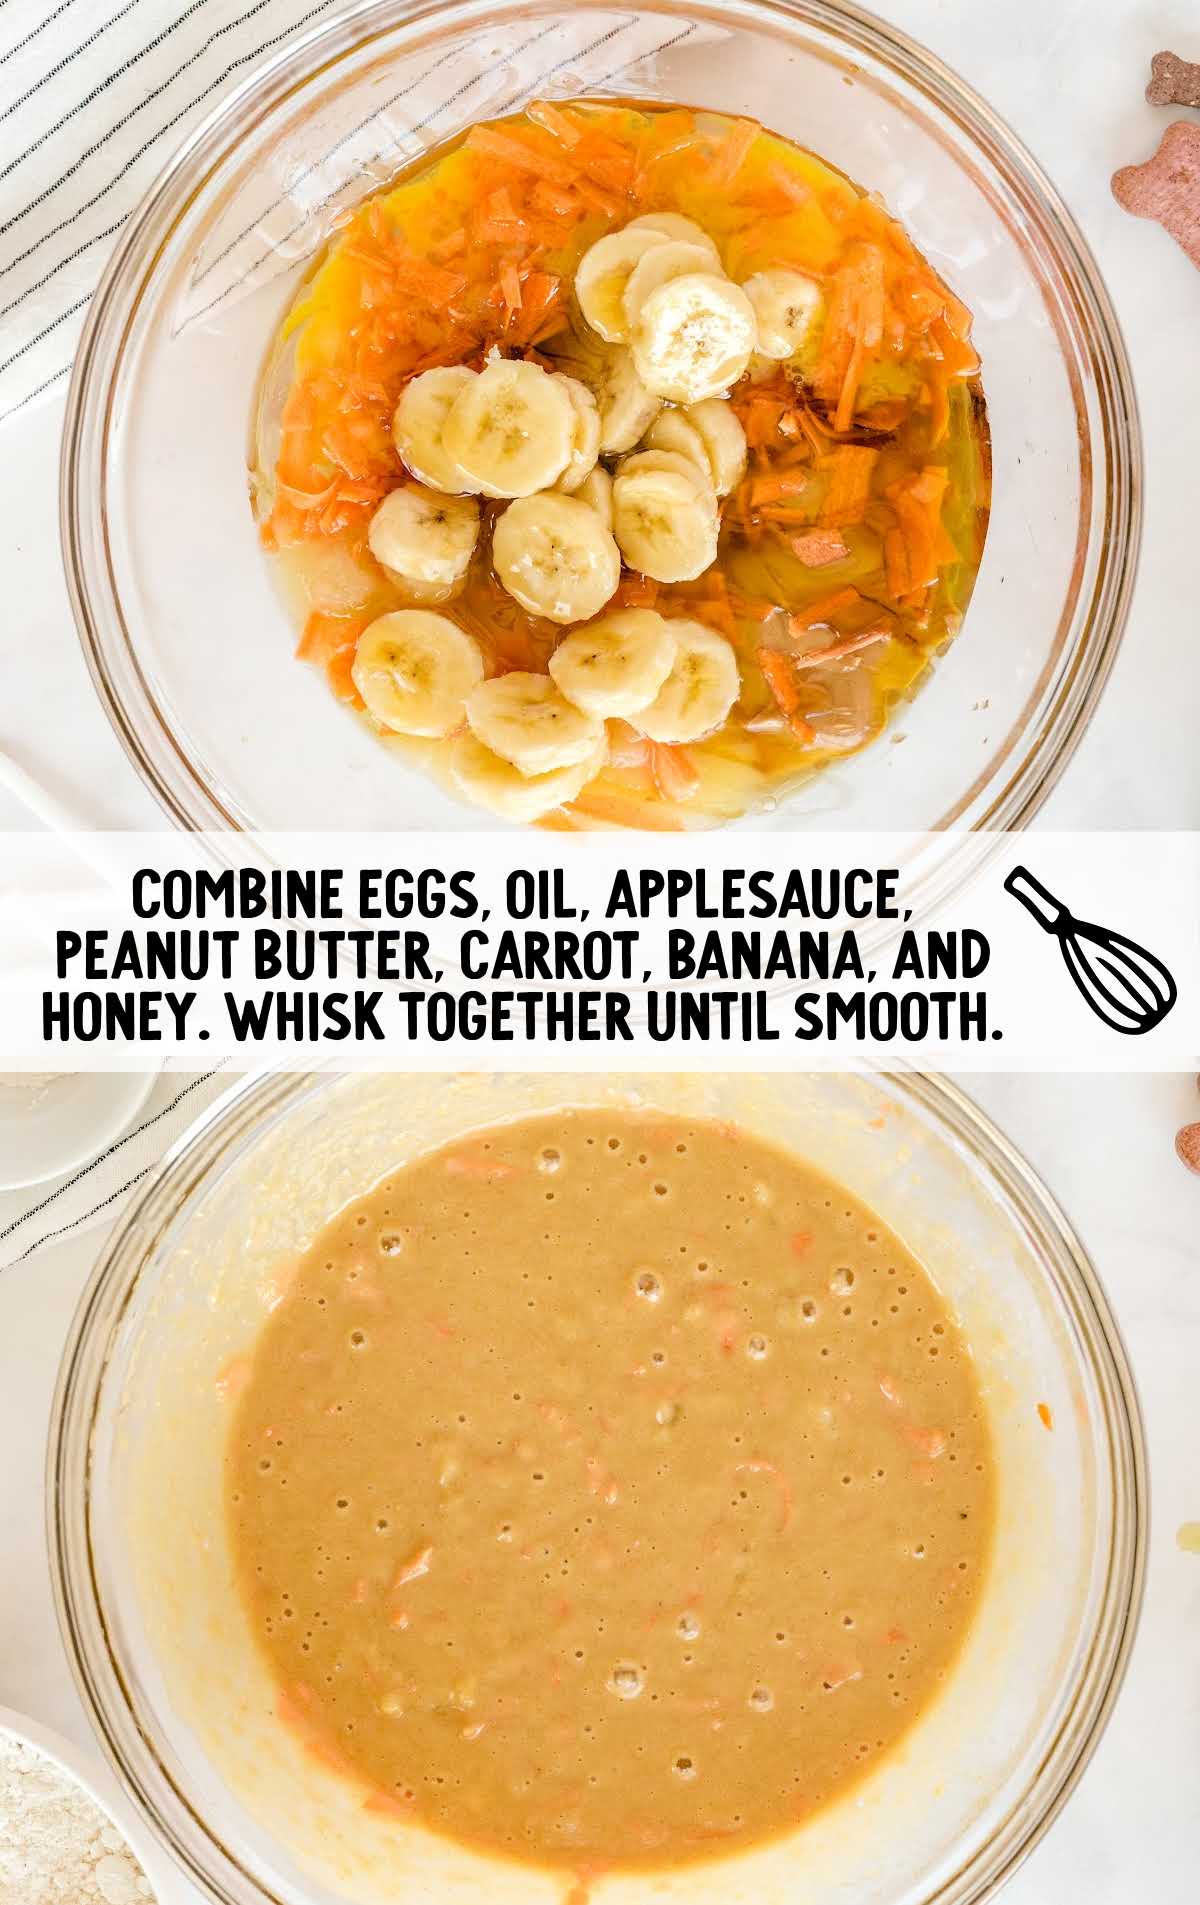 eggs, oil, applesauce, peanut butter, carrot, banana, and honey being mixed together in a bowl